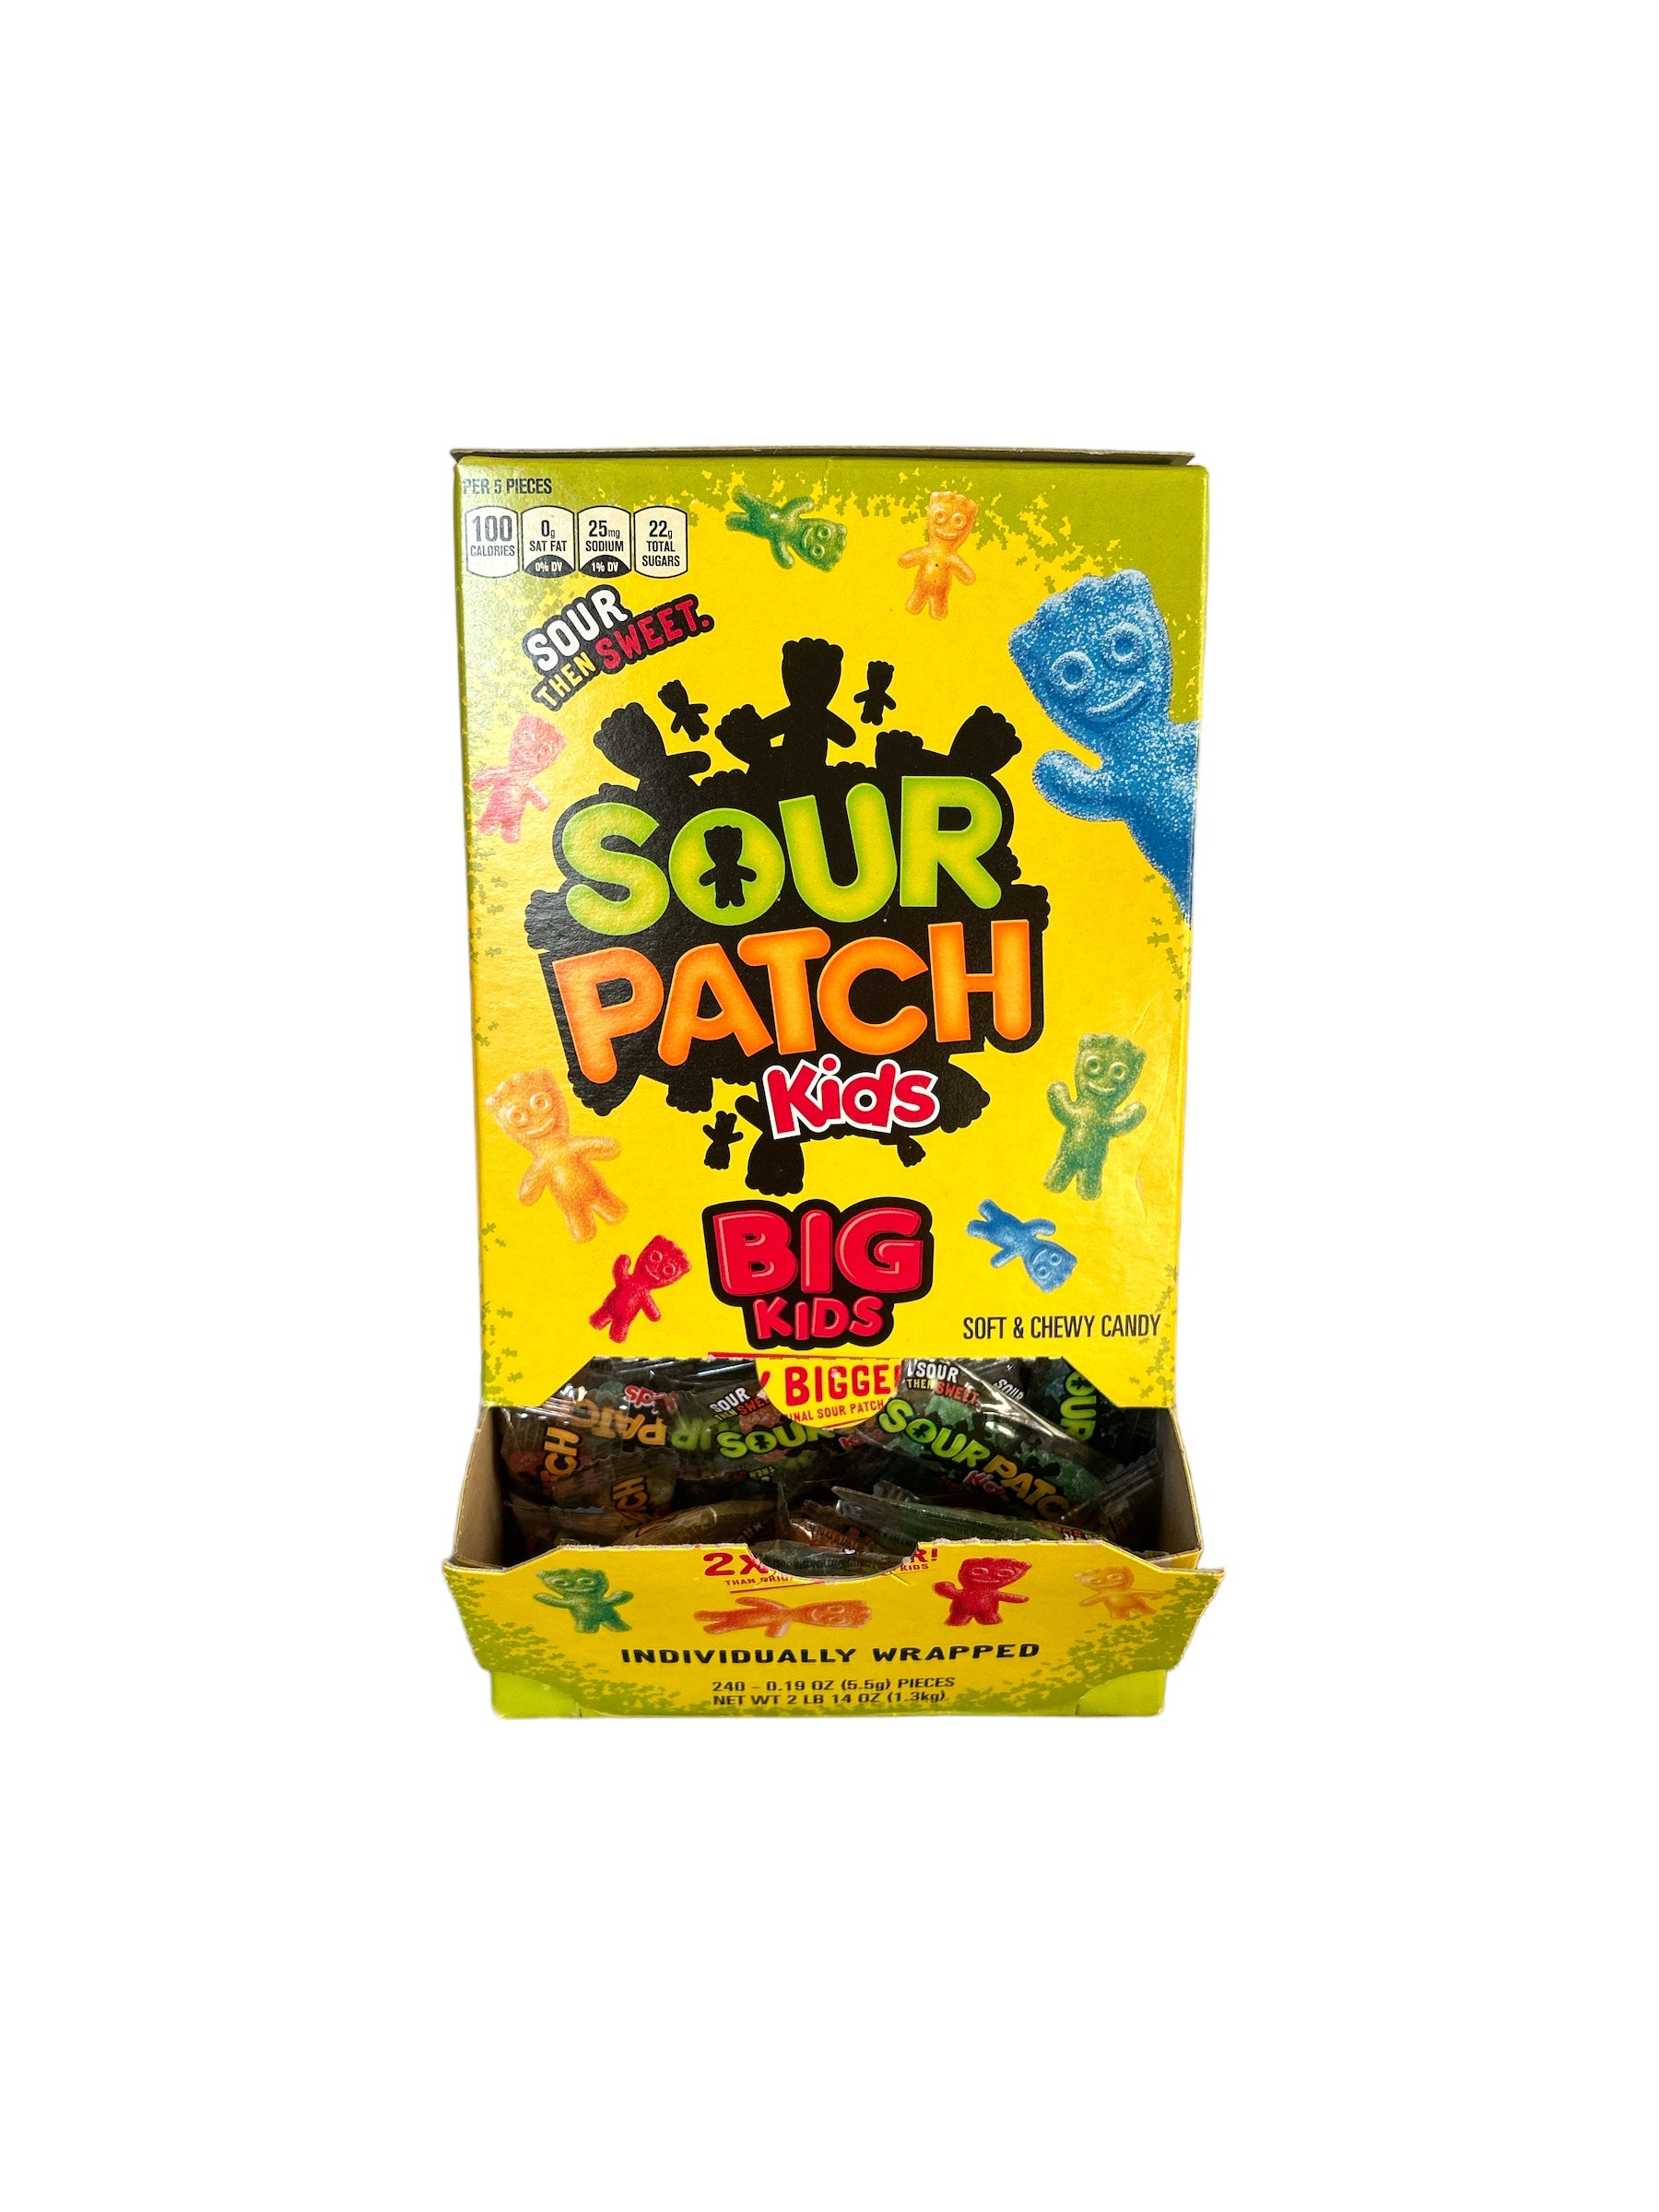 Sour Patch Kids - Soft & Chewy Candy Individually Wrapped / Caramelle Aspre confezionate singolarmente  1pz 5.5g